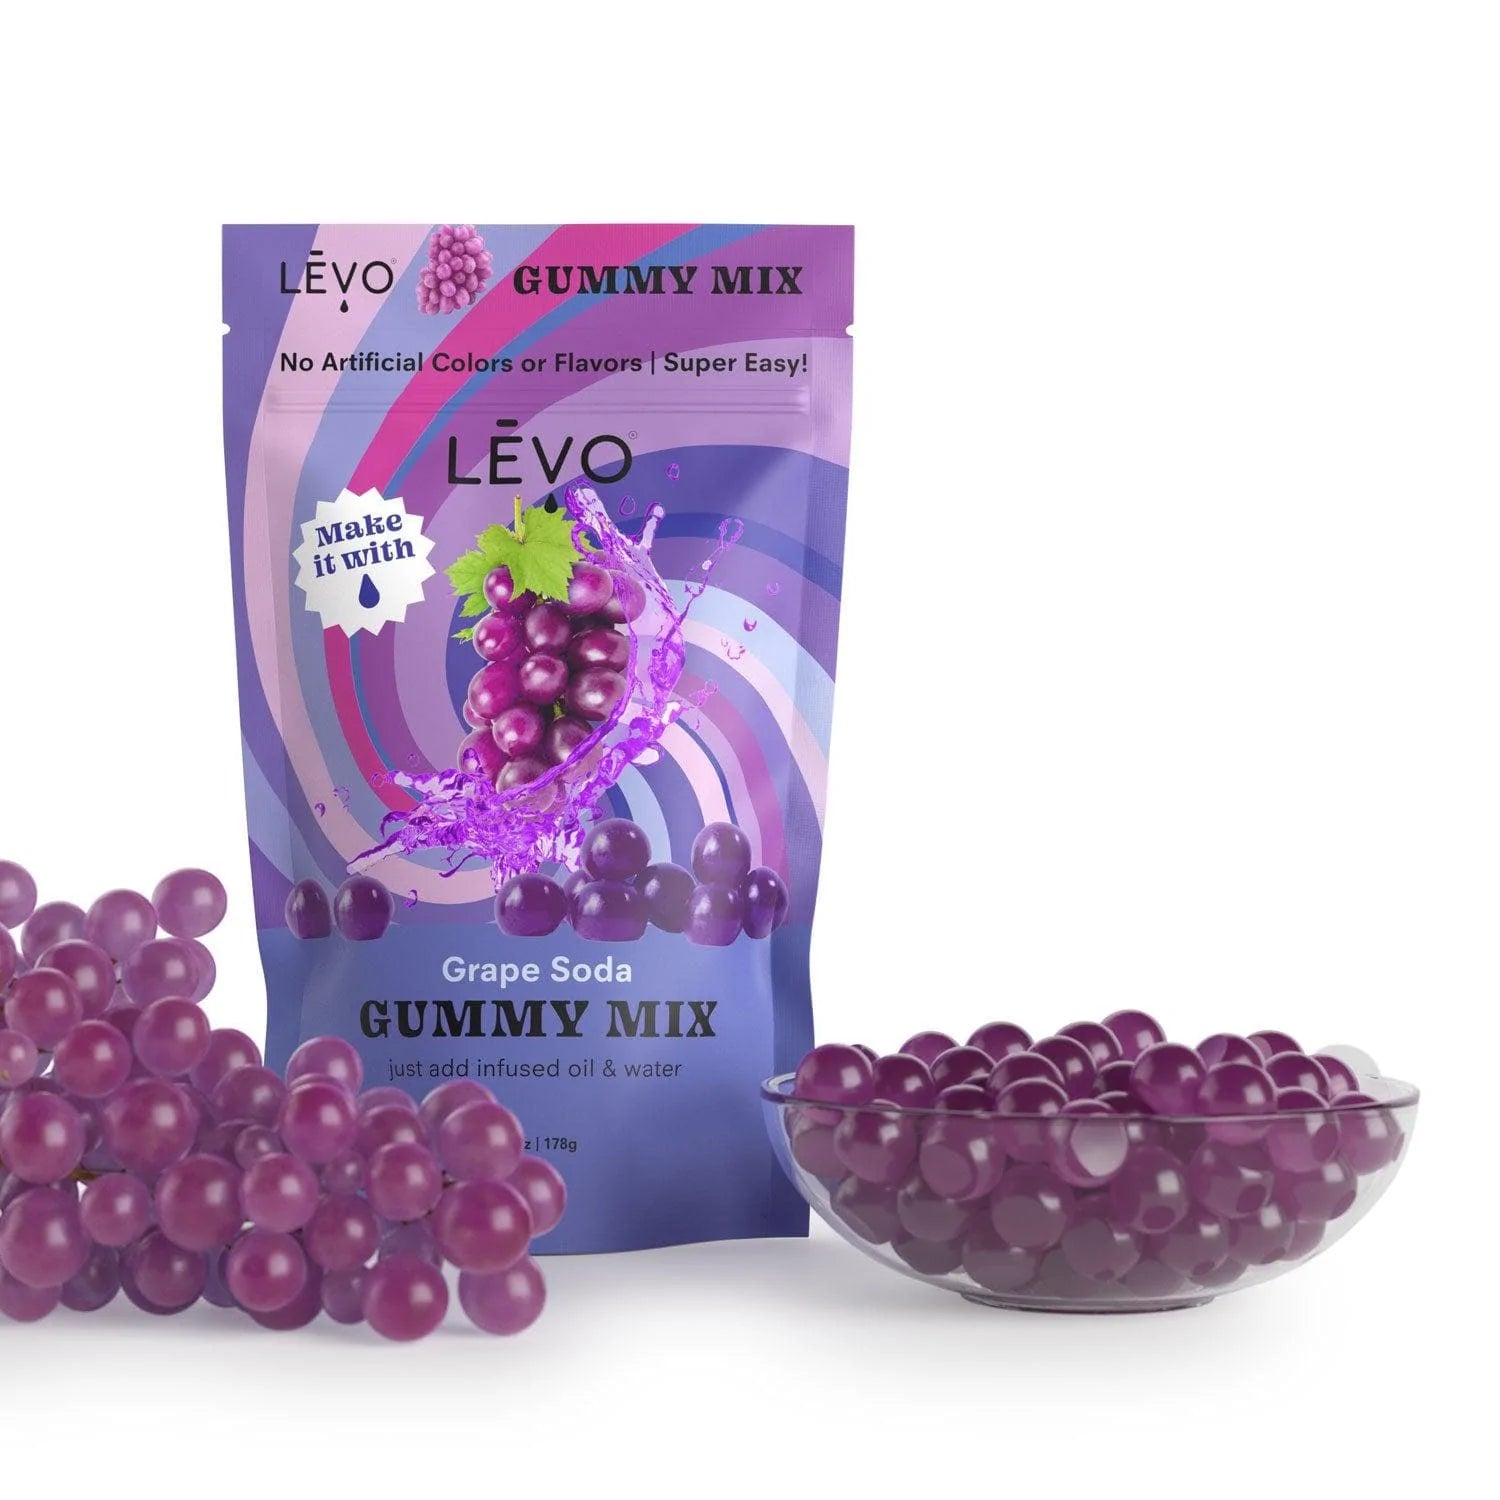 Grape Soda gummy mix, made with all natural colors and flavors. Make your own dosed edible gummies at home, and save 10x the cost of buying pre-made. LEVO pays for itself compared to buying tinctures and gummies at the store.